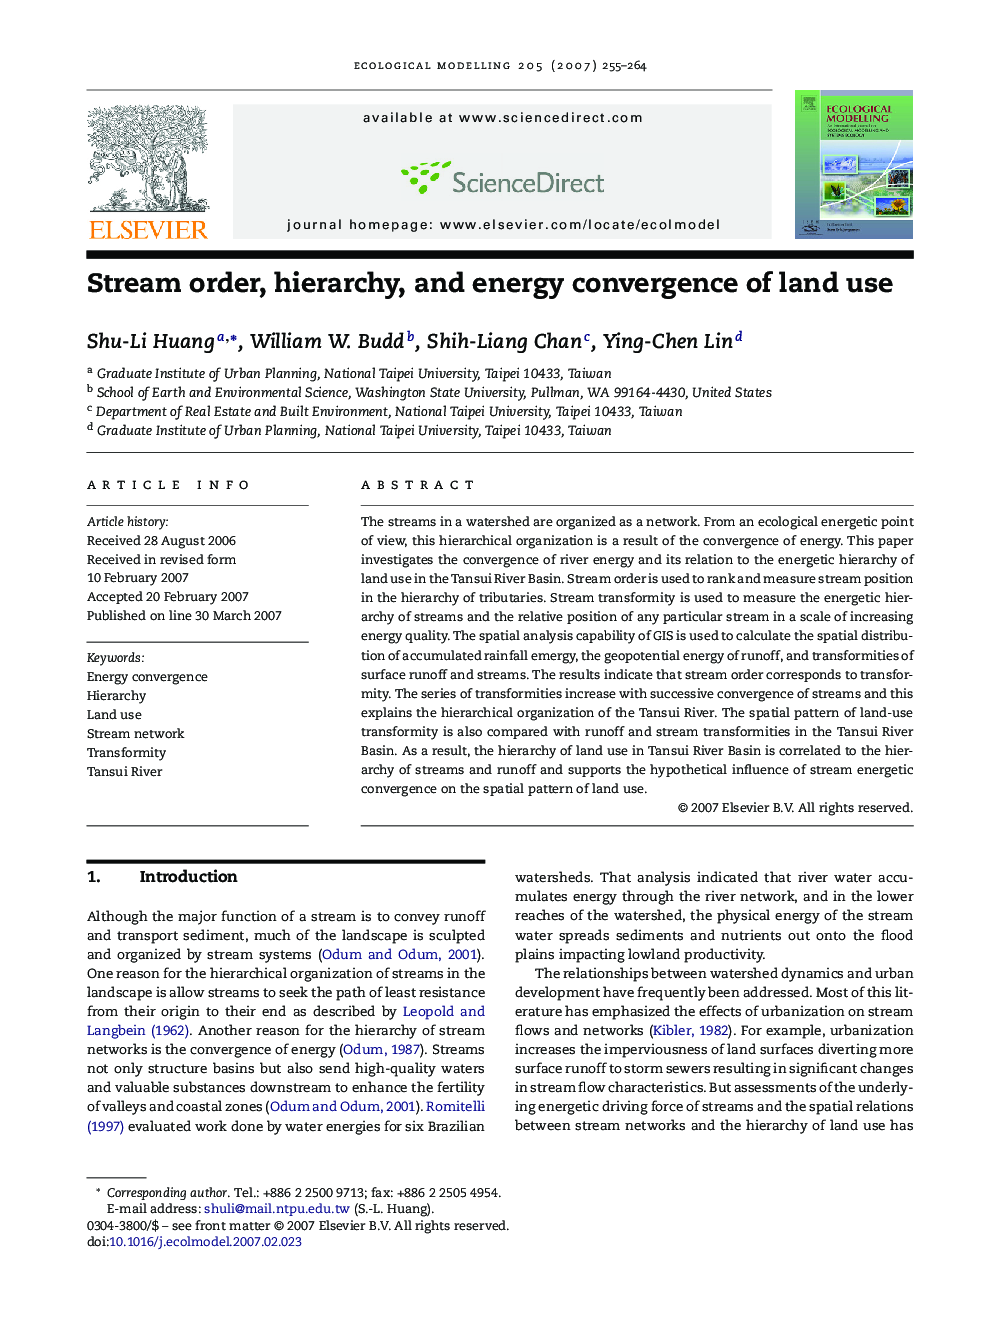 Stream order, hierarchy, and energy convergence of land use